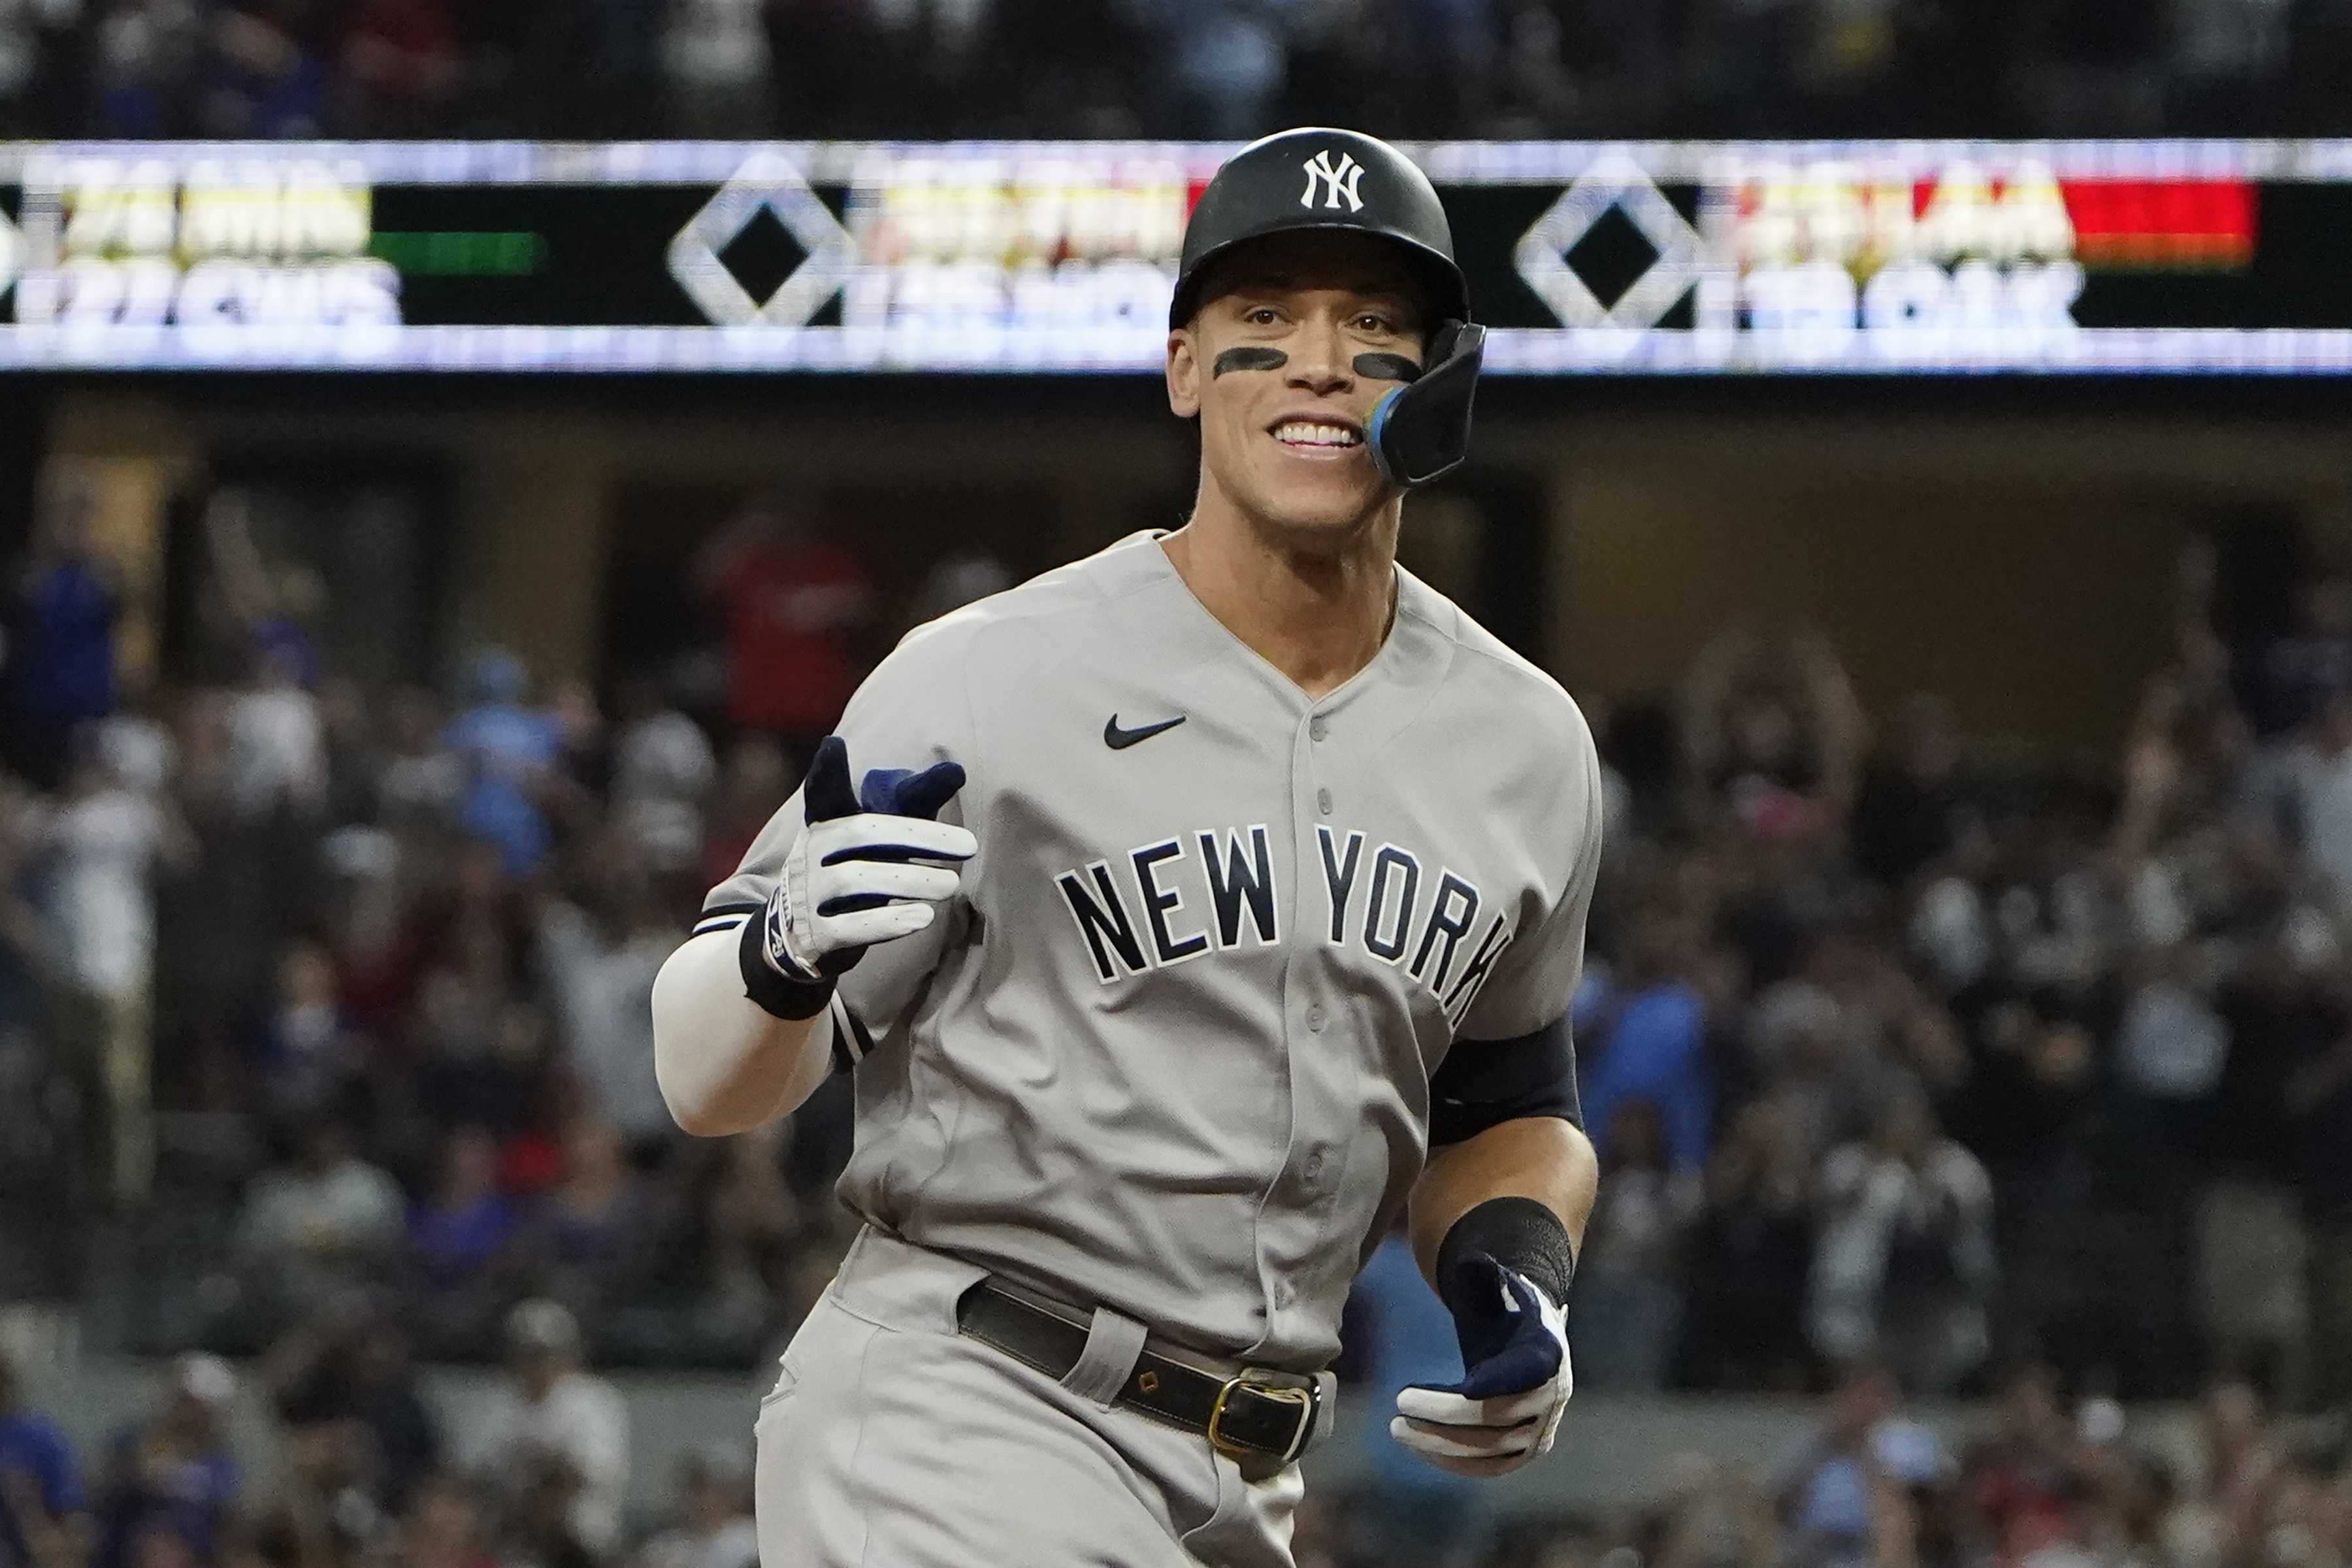 Aaron Judge plays leftfield, but no balls hit to him in Yankees